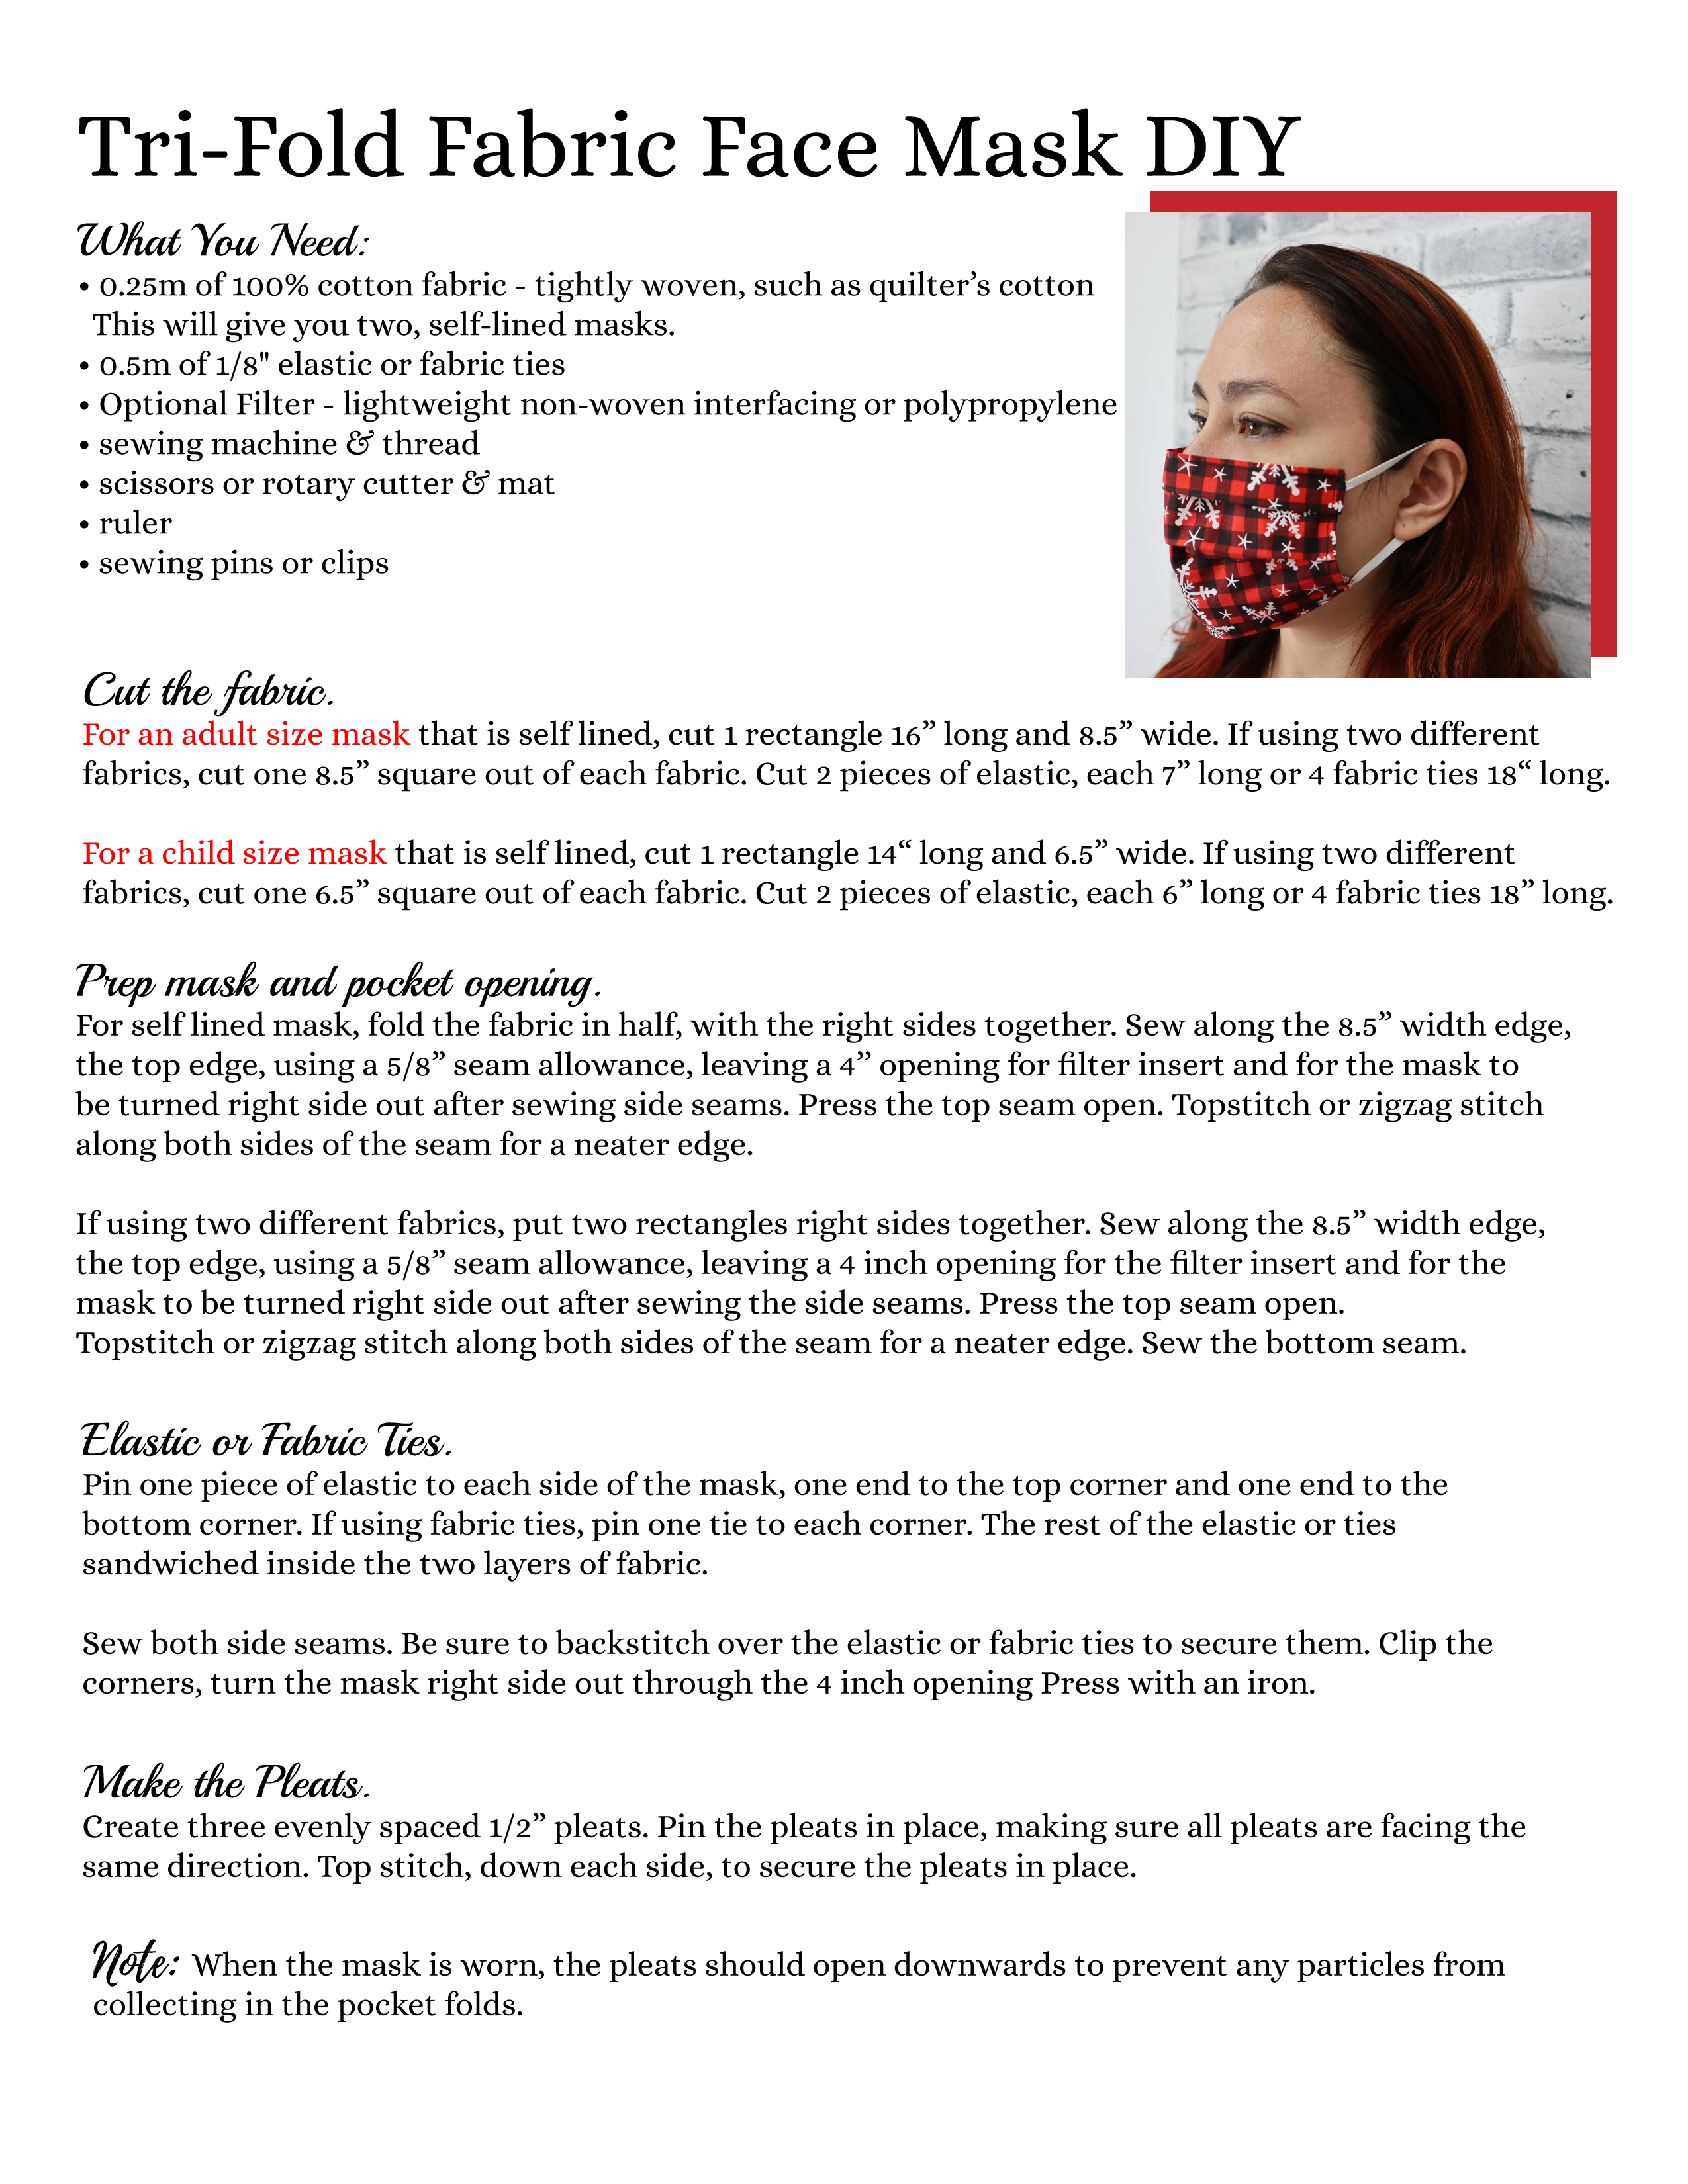 Steps to create your trifoldface mask